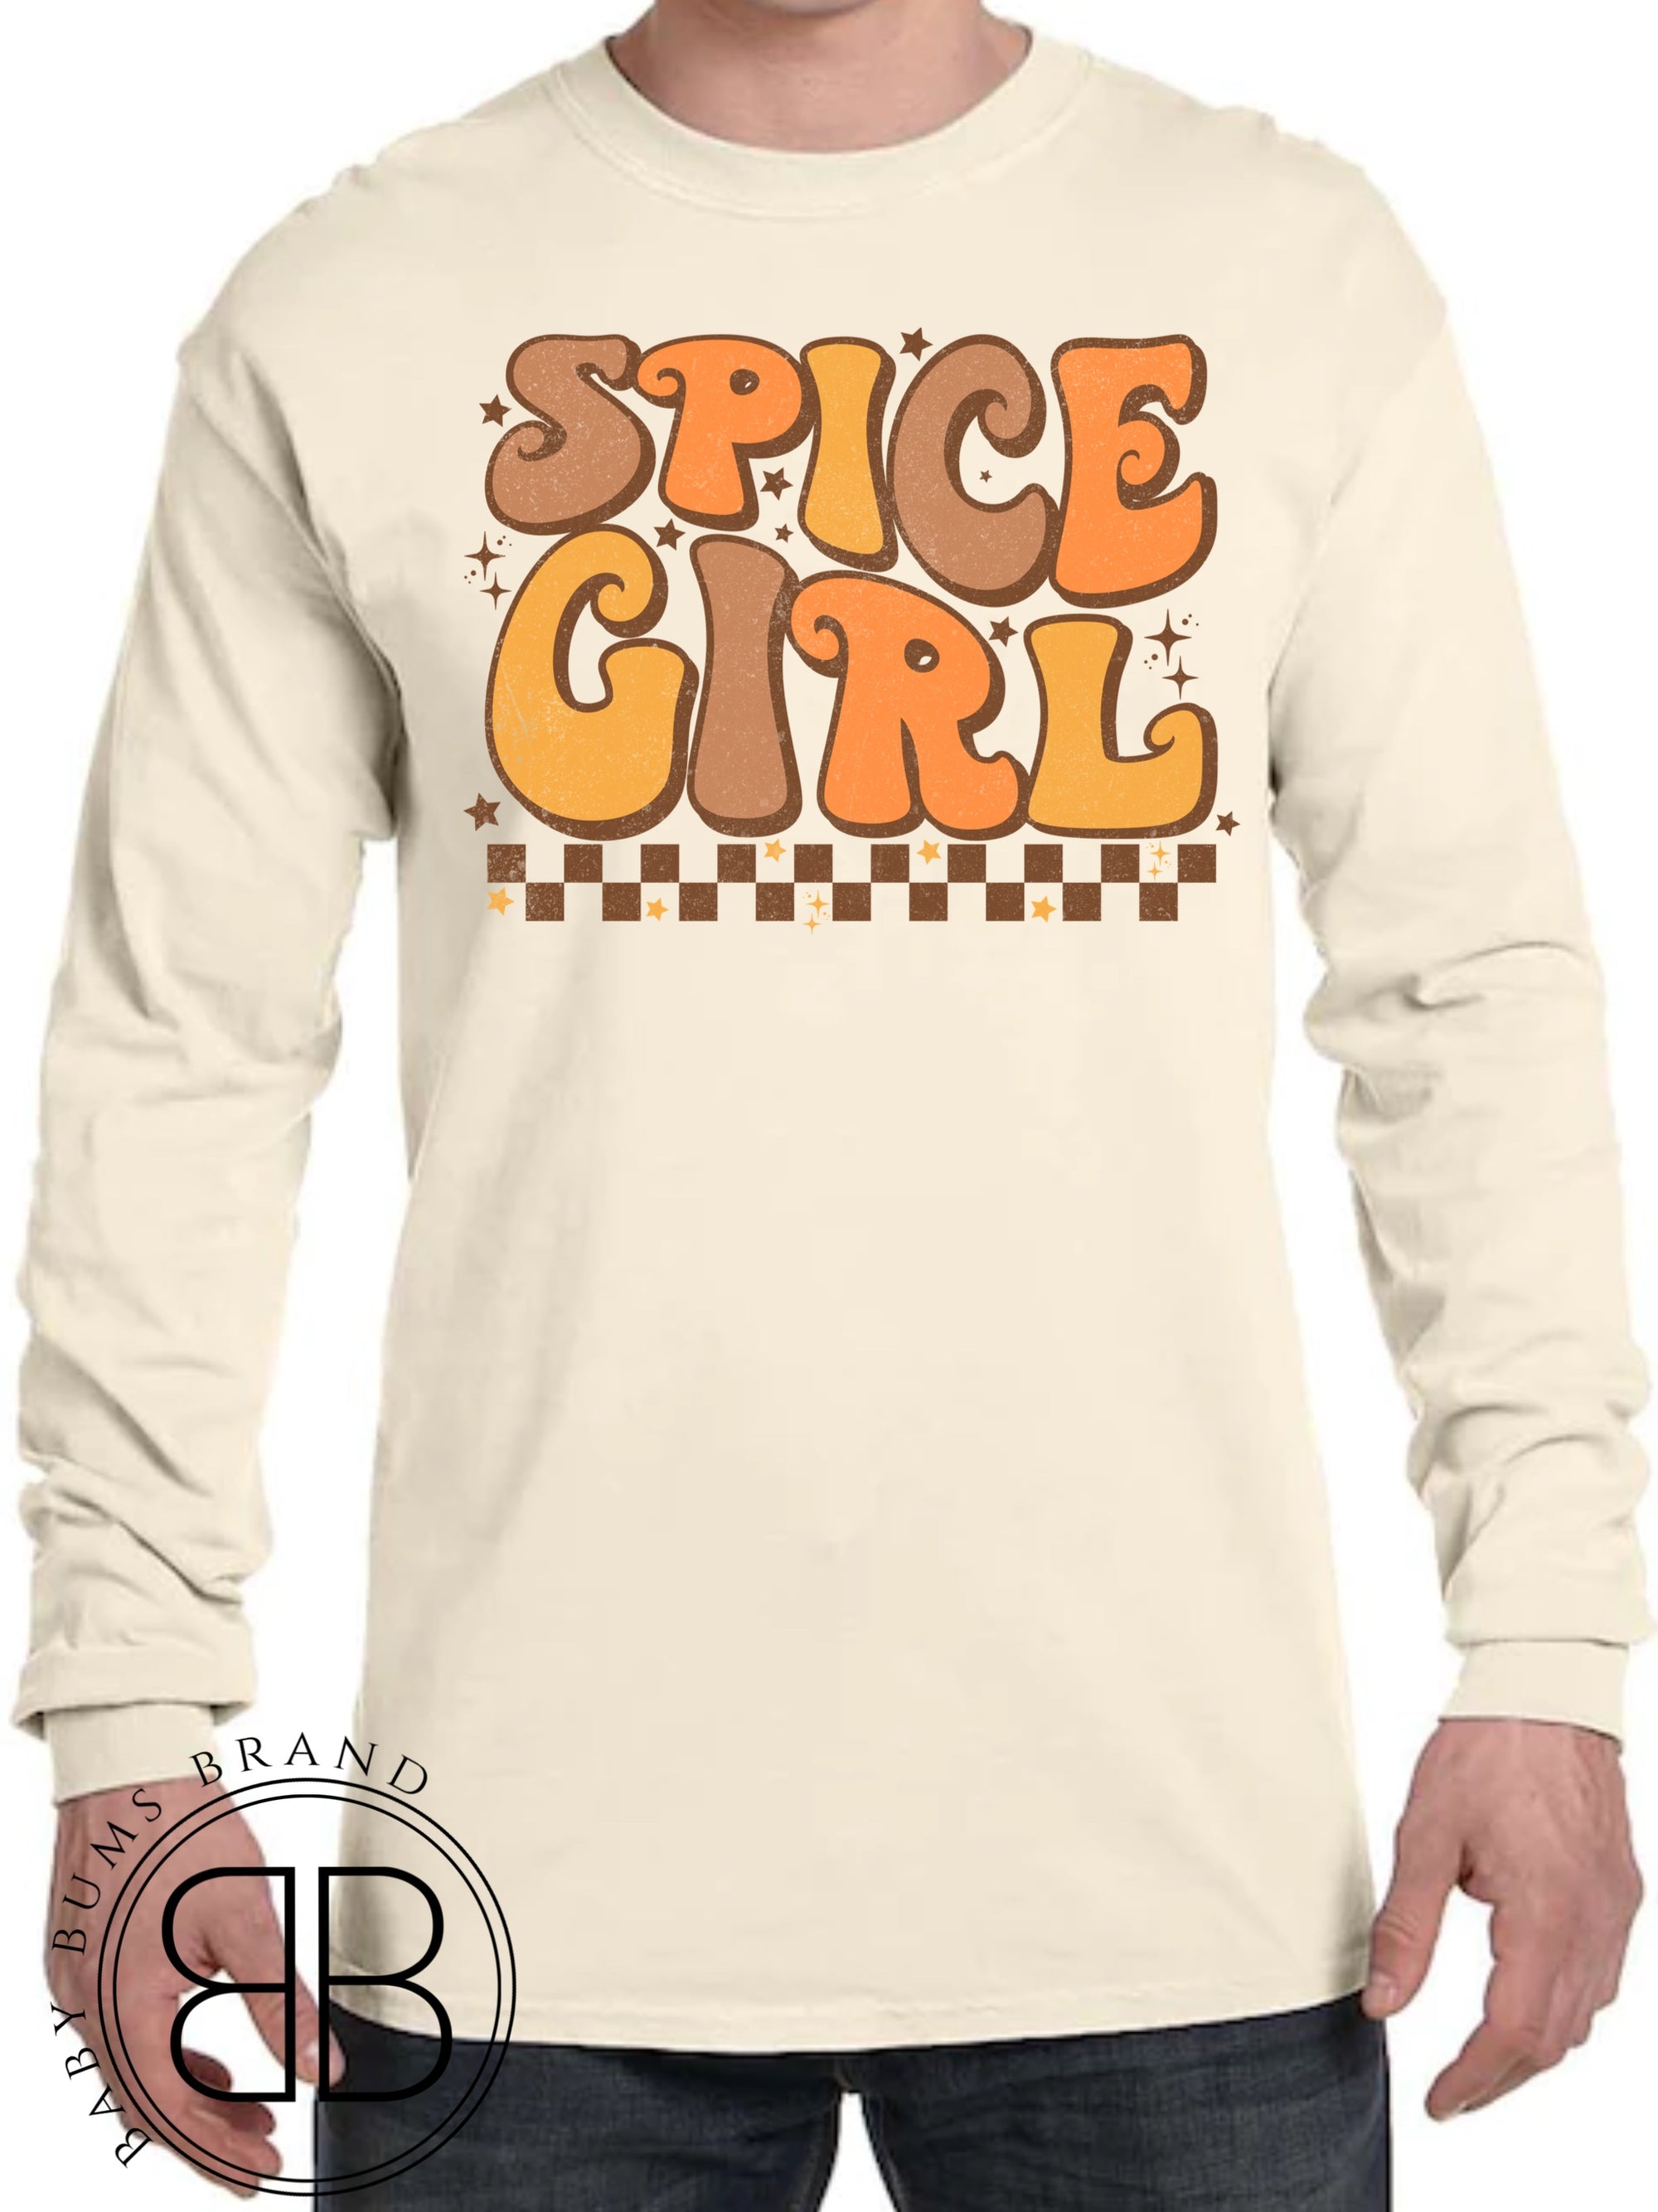 RTS Adult (S) Spice Girl (Graphic T-shirt) - Baby Bums Clothing 